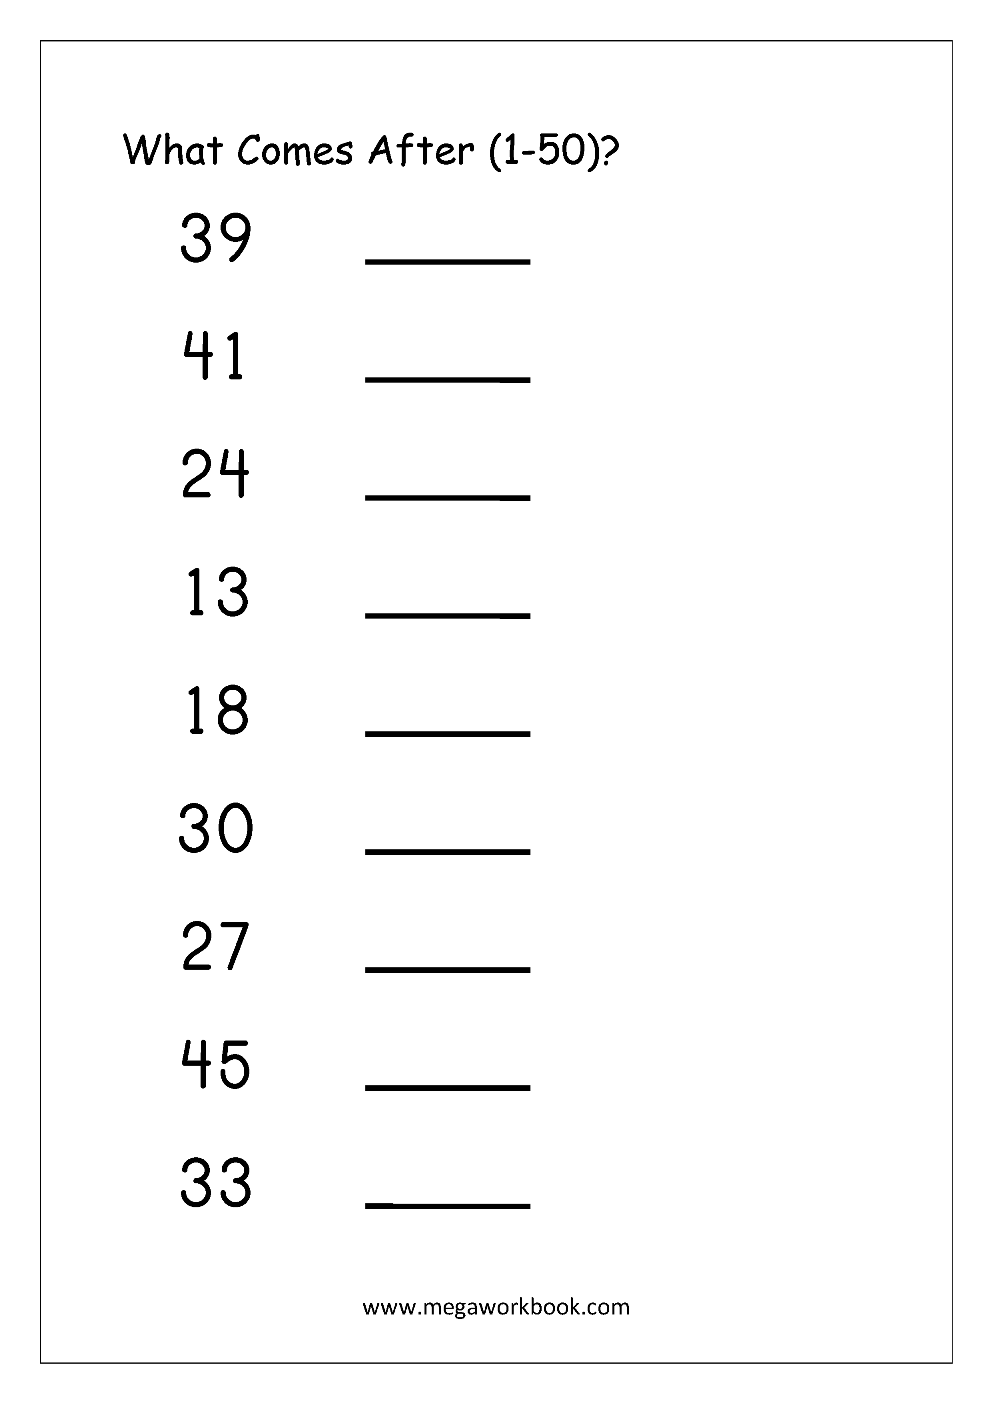 Ordering Numbers Worksheets Missing Numbers What Comes Before And After Number 1 10 1 20 1